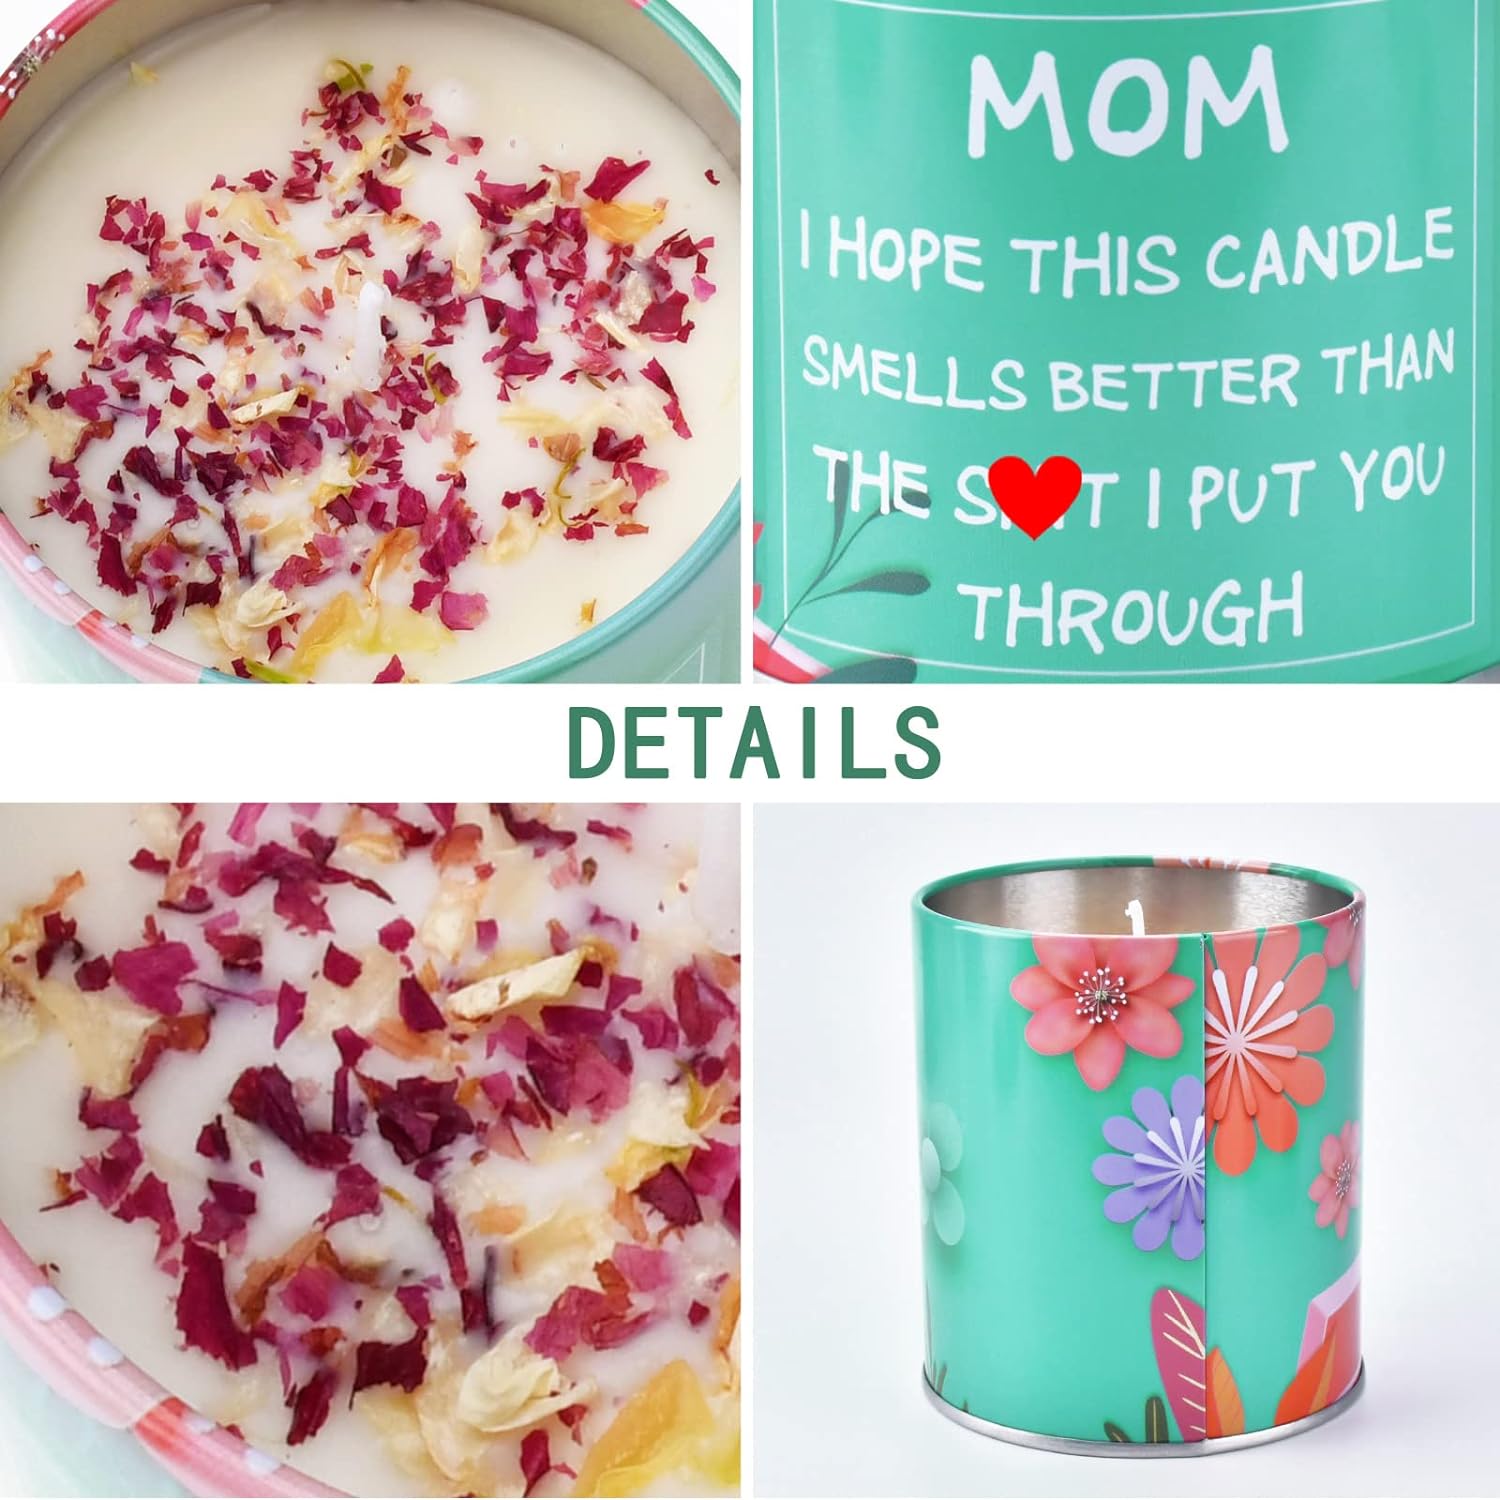 Mothers Day Gifts From Daughter,Son-Mom Scented Candles Funny Gifts Ideas For Mom,Mothers Day/Christmas Birthday Unique Gifts For Mama,9Oz